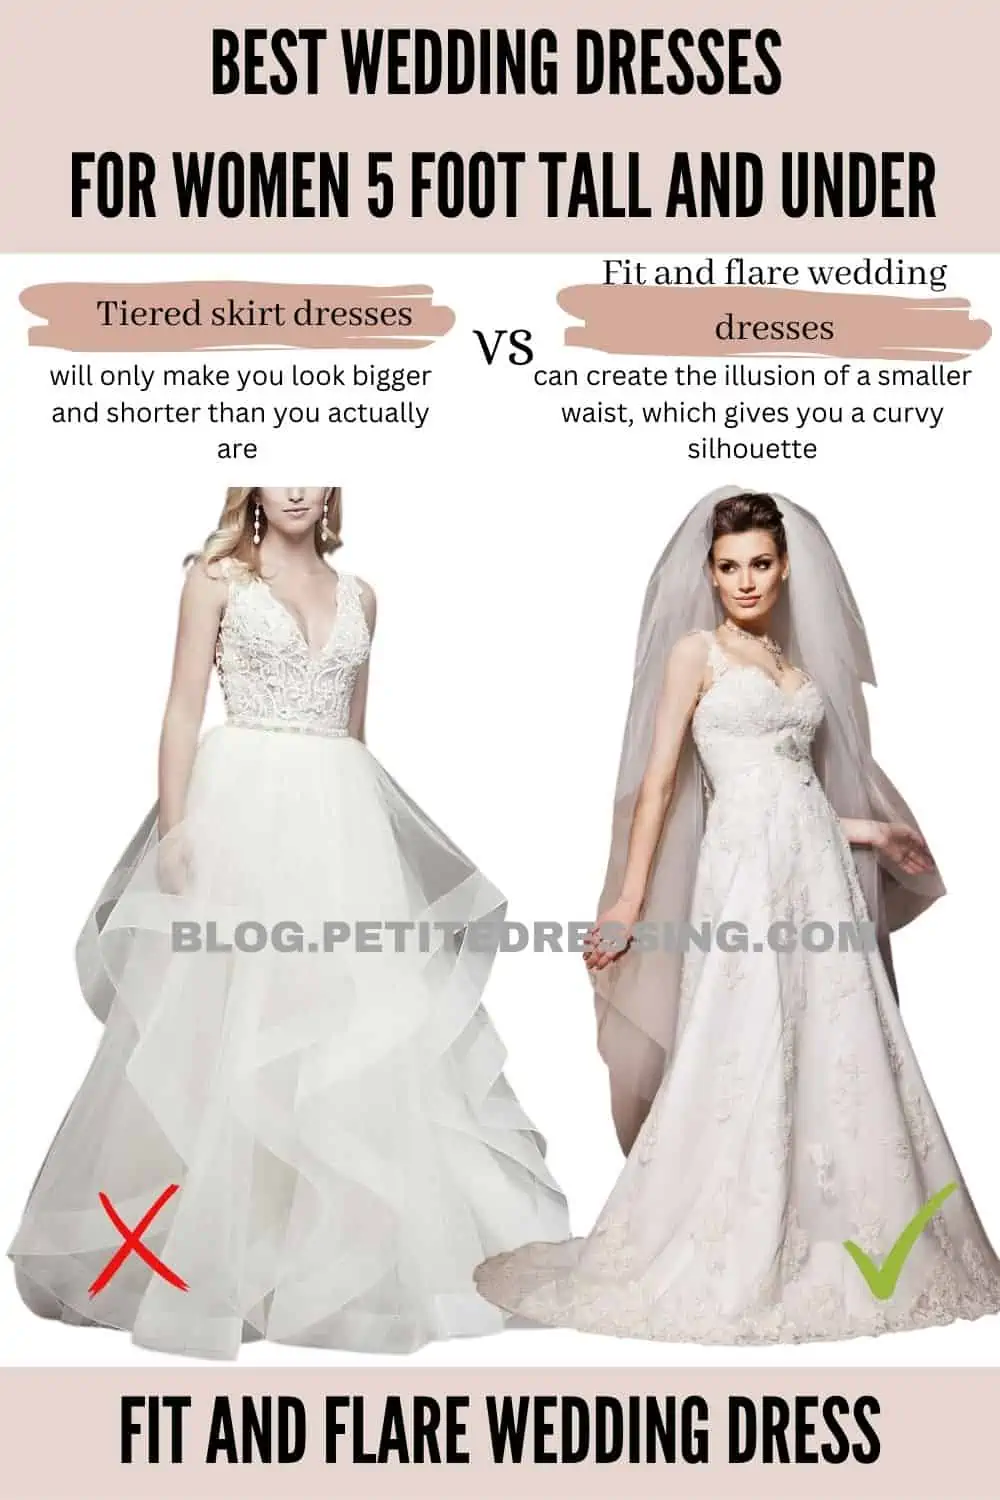 Wedding Dress Guide for Women 5 foot tall and under - Petite Dressing